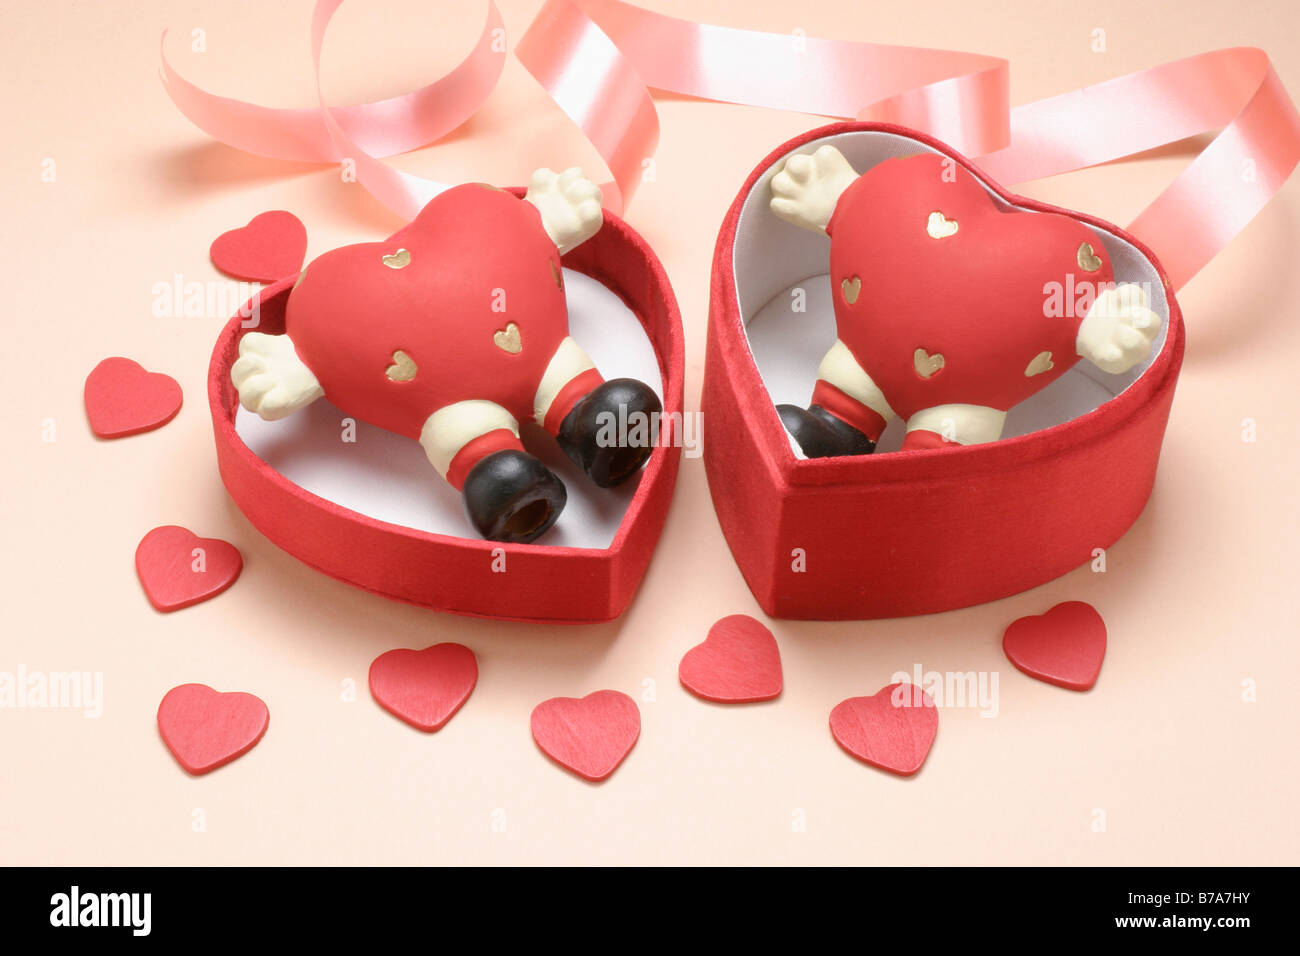 Loveheart figurines in gift box Stock Photo